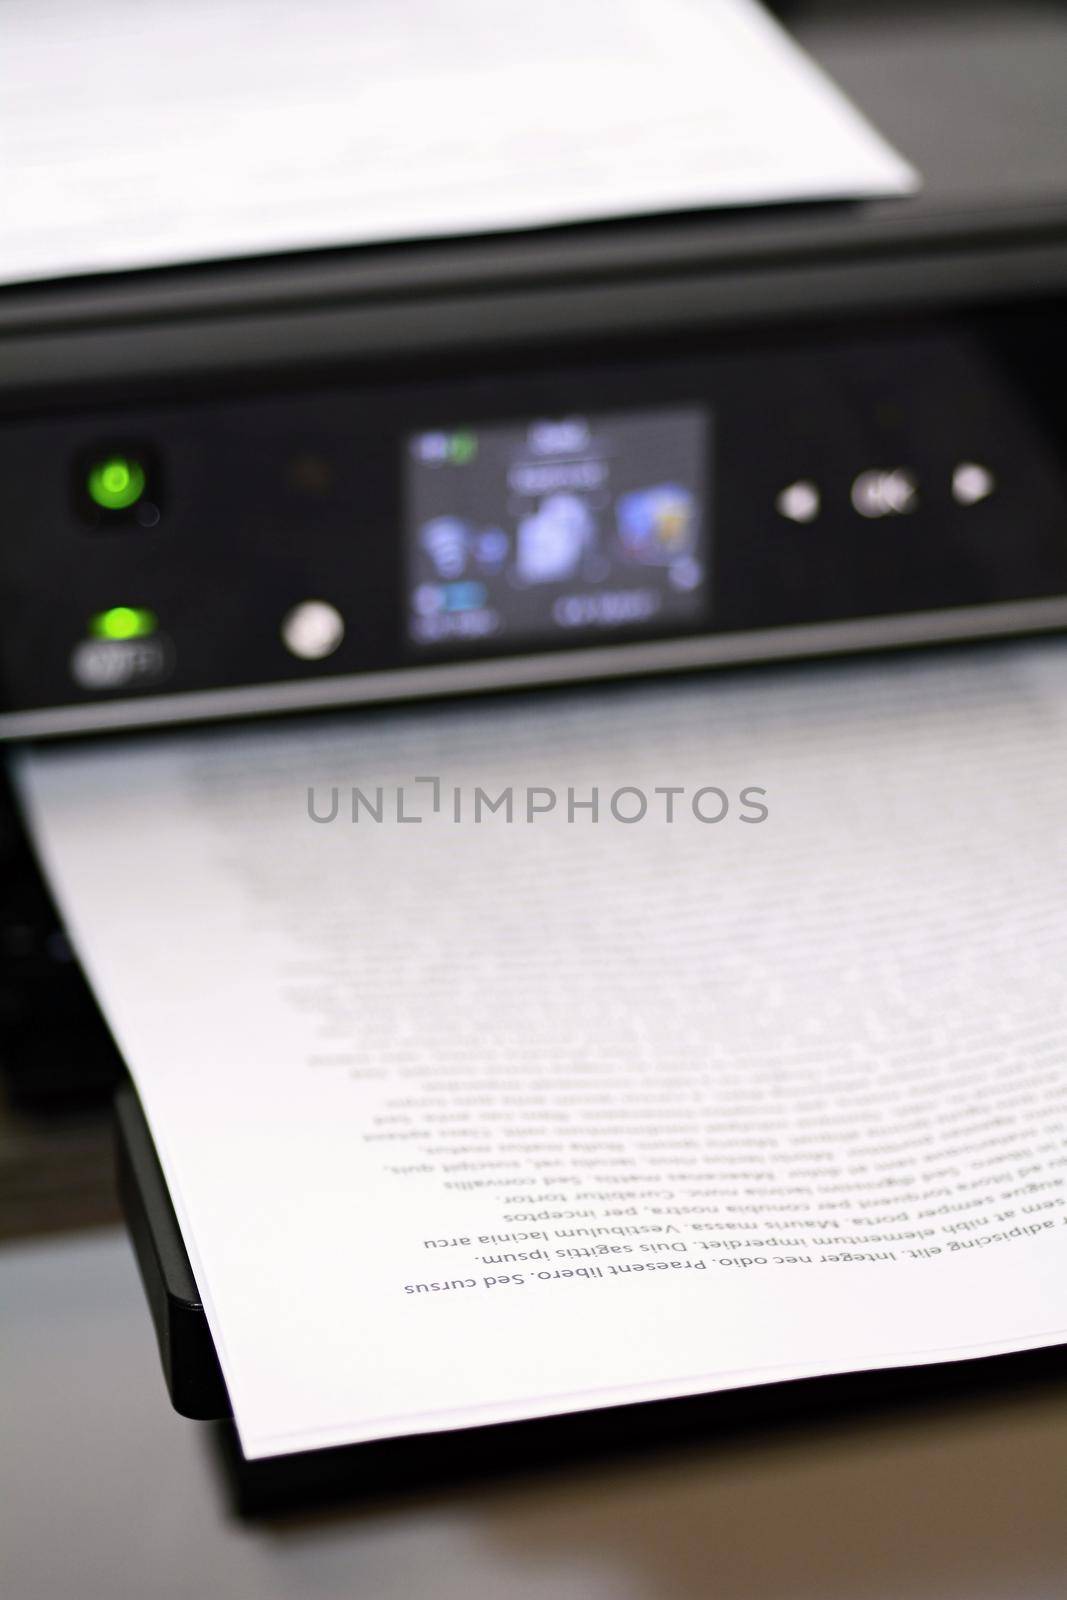 Inkjet printer with paper by hamik